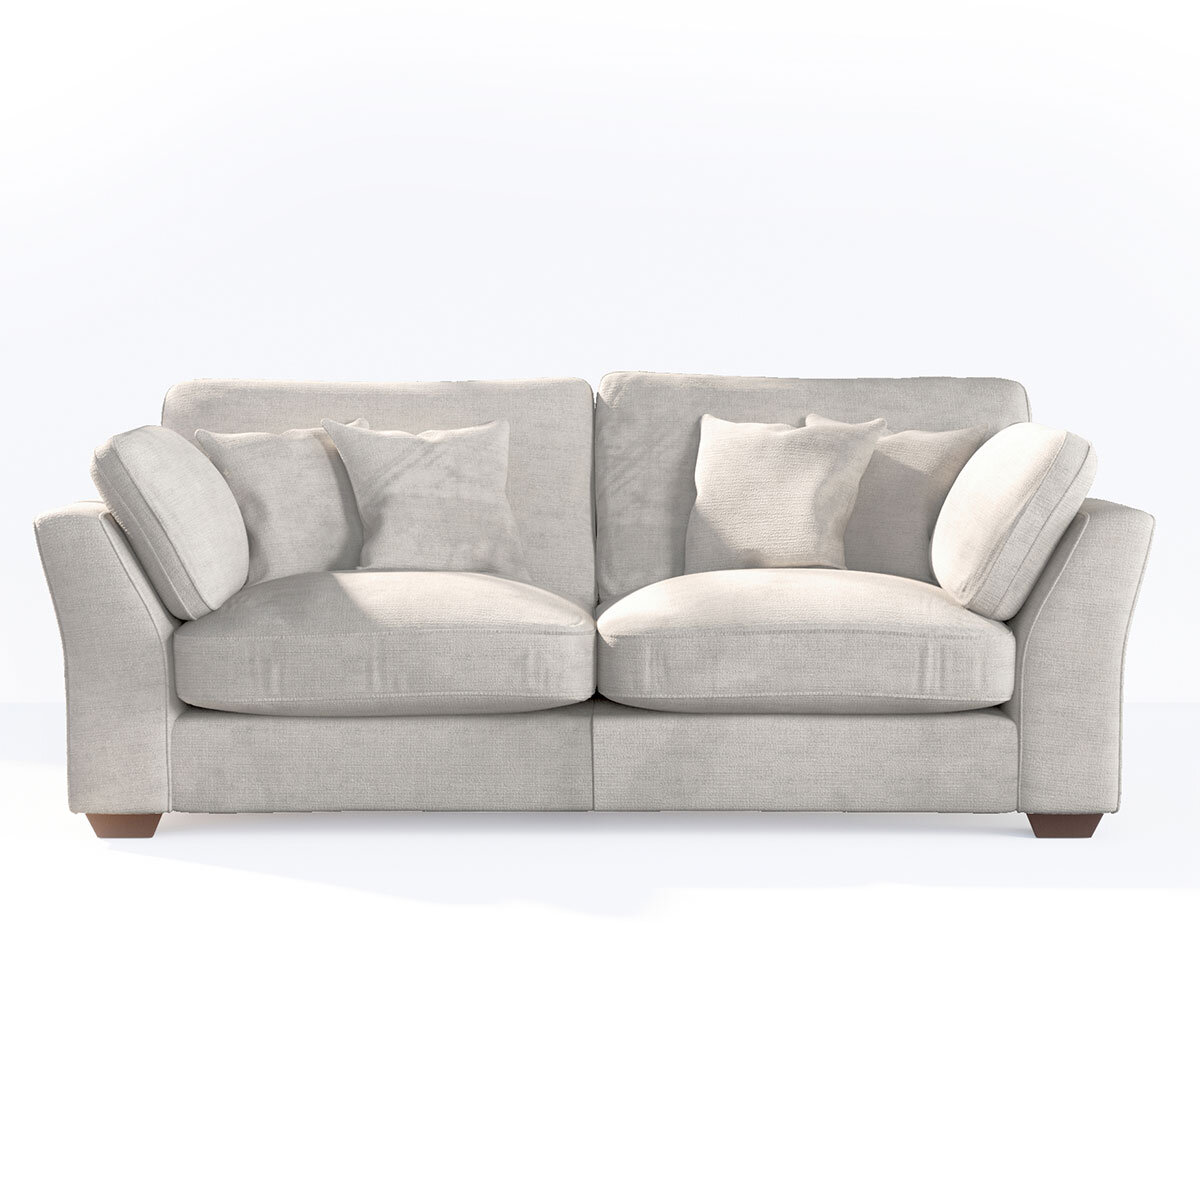 Selsey Pum ice Fabric 3 Seater Sofa